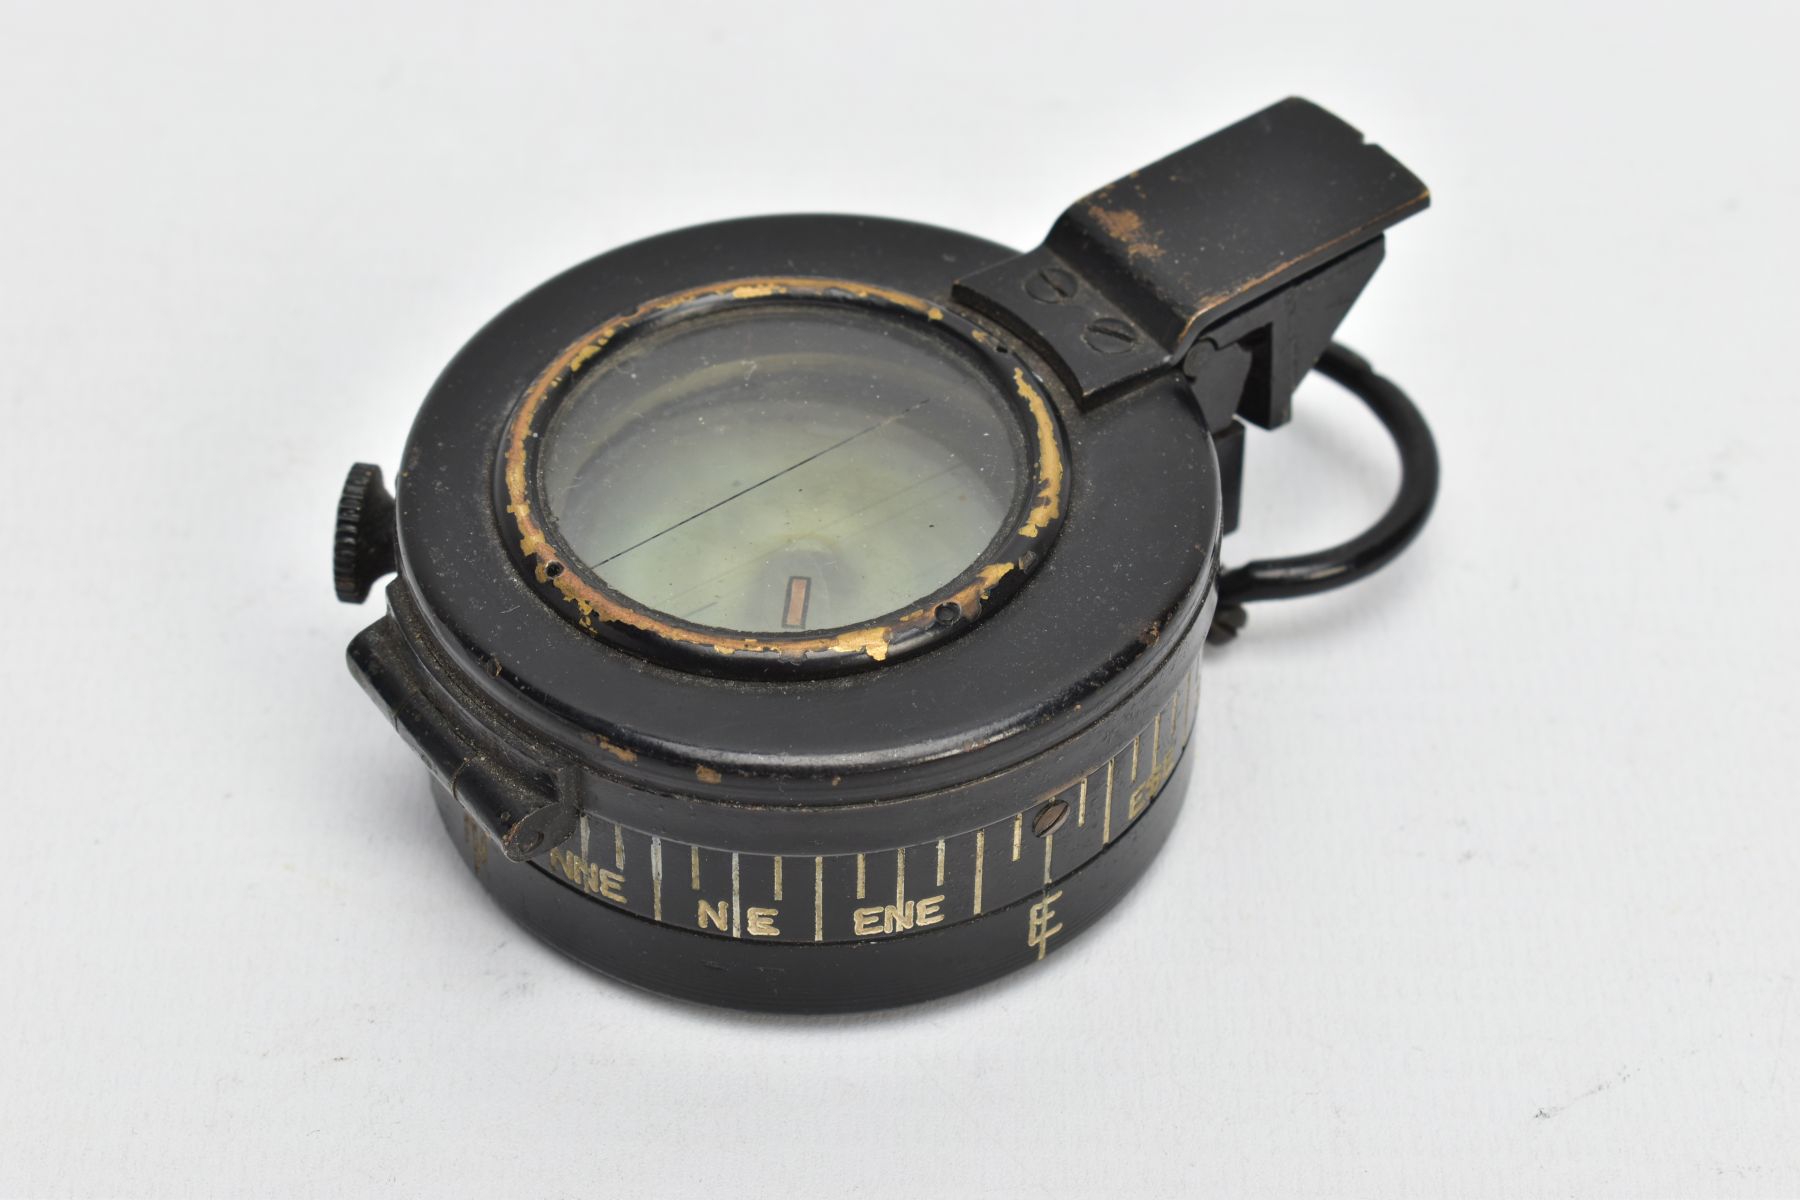 A MILITARY COMPASS, black compass, stamped T.G.C2 Ltd London number 234303, dated 1943 MK III